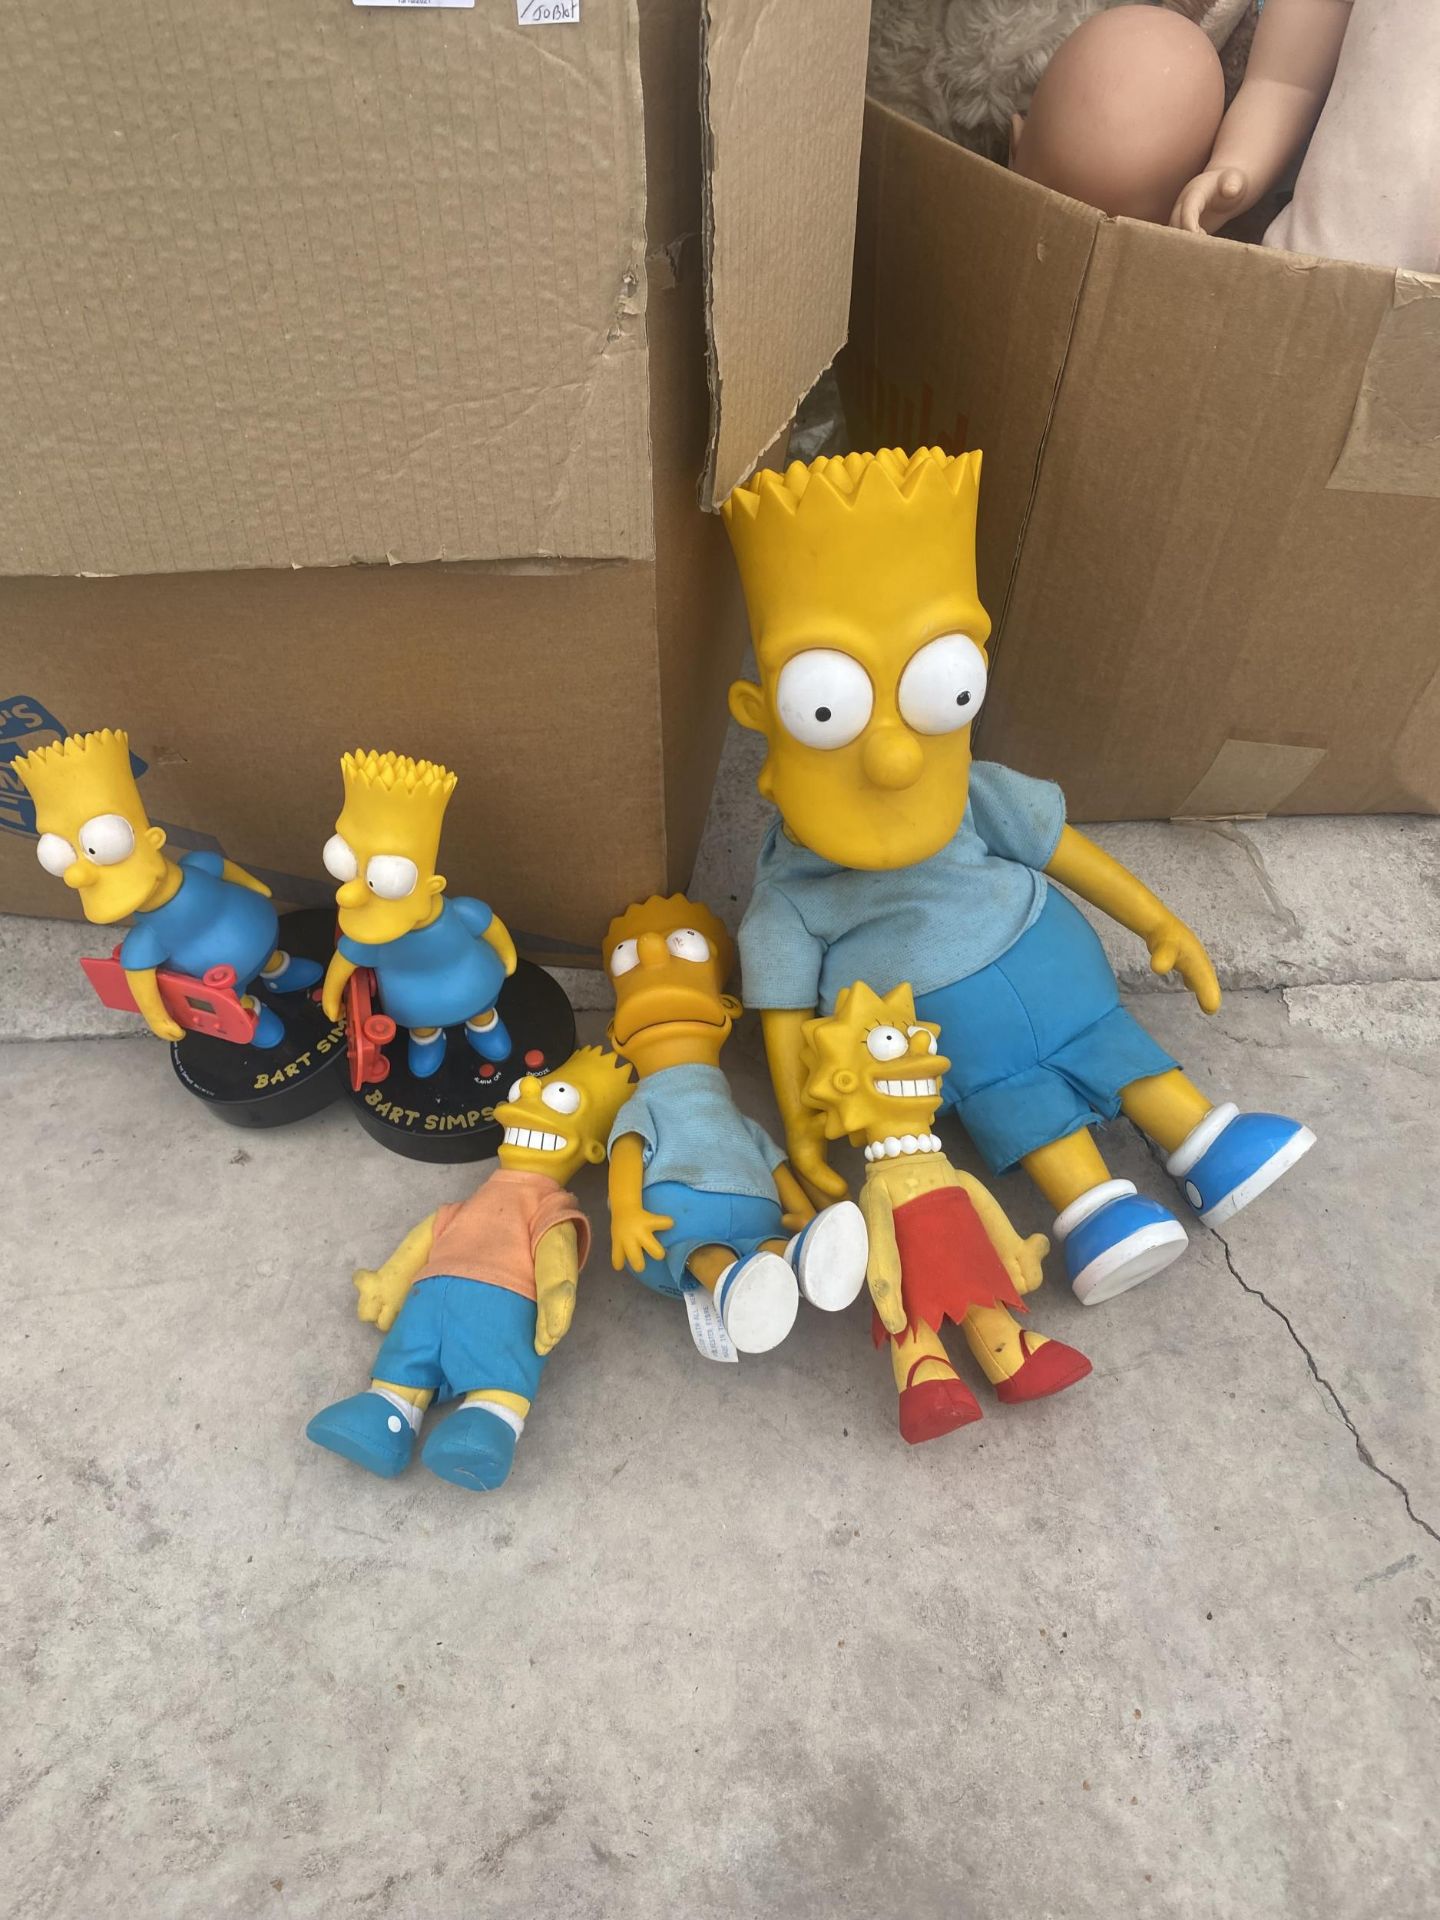 AN ASSORTMENT OF CHILDRENS TOYS AND DOLLS TO INCLUDE BART SIMPSON FIGURES - Image 2 of 3